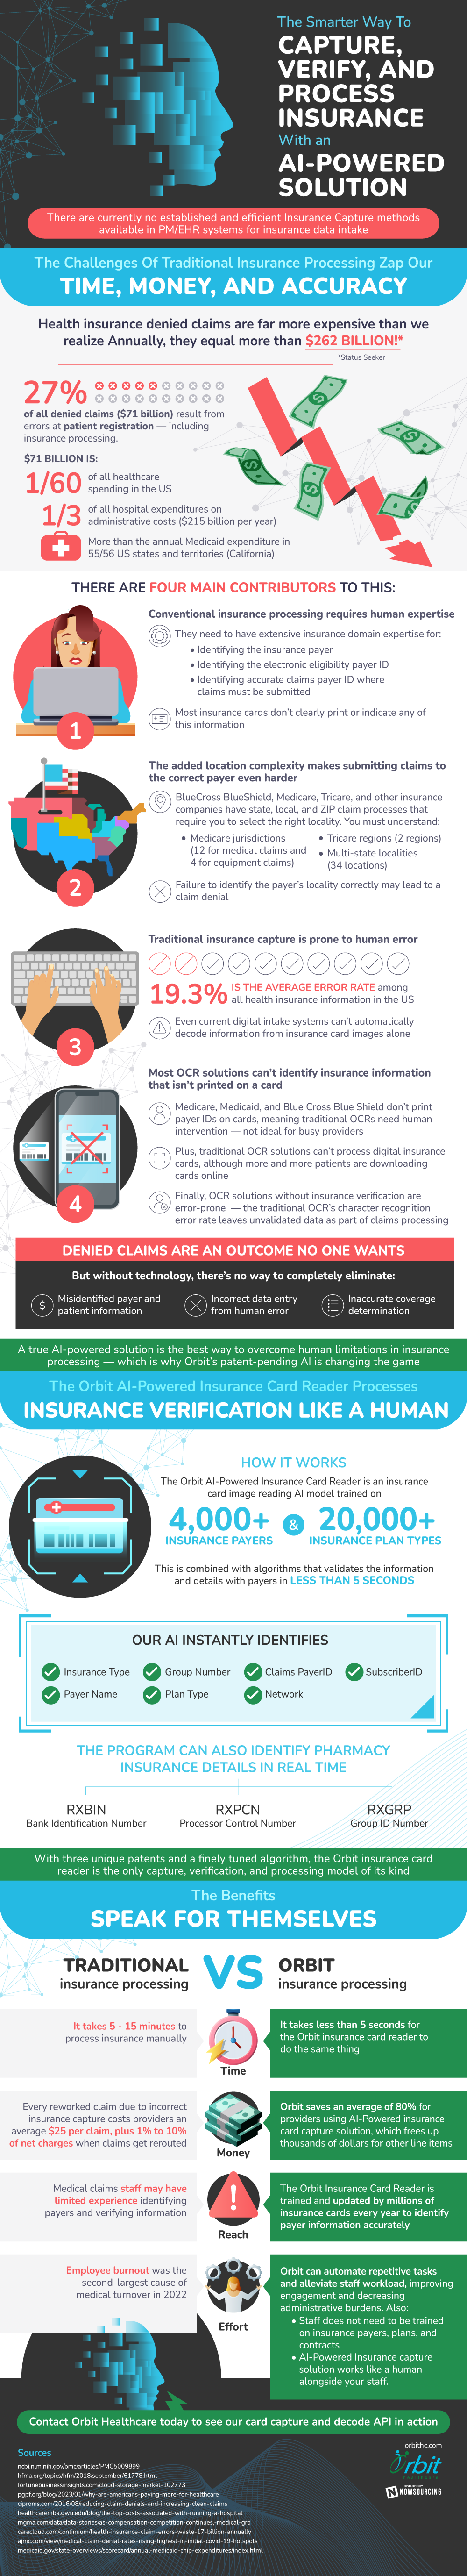 The Smarter Way to Capture, Verify and Process Insurance - Infographic